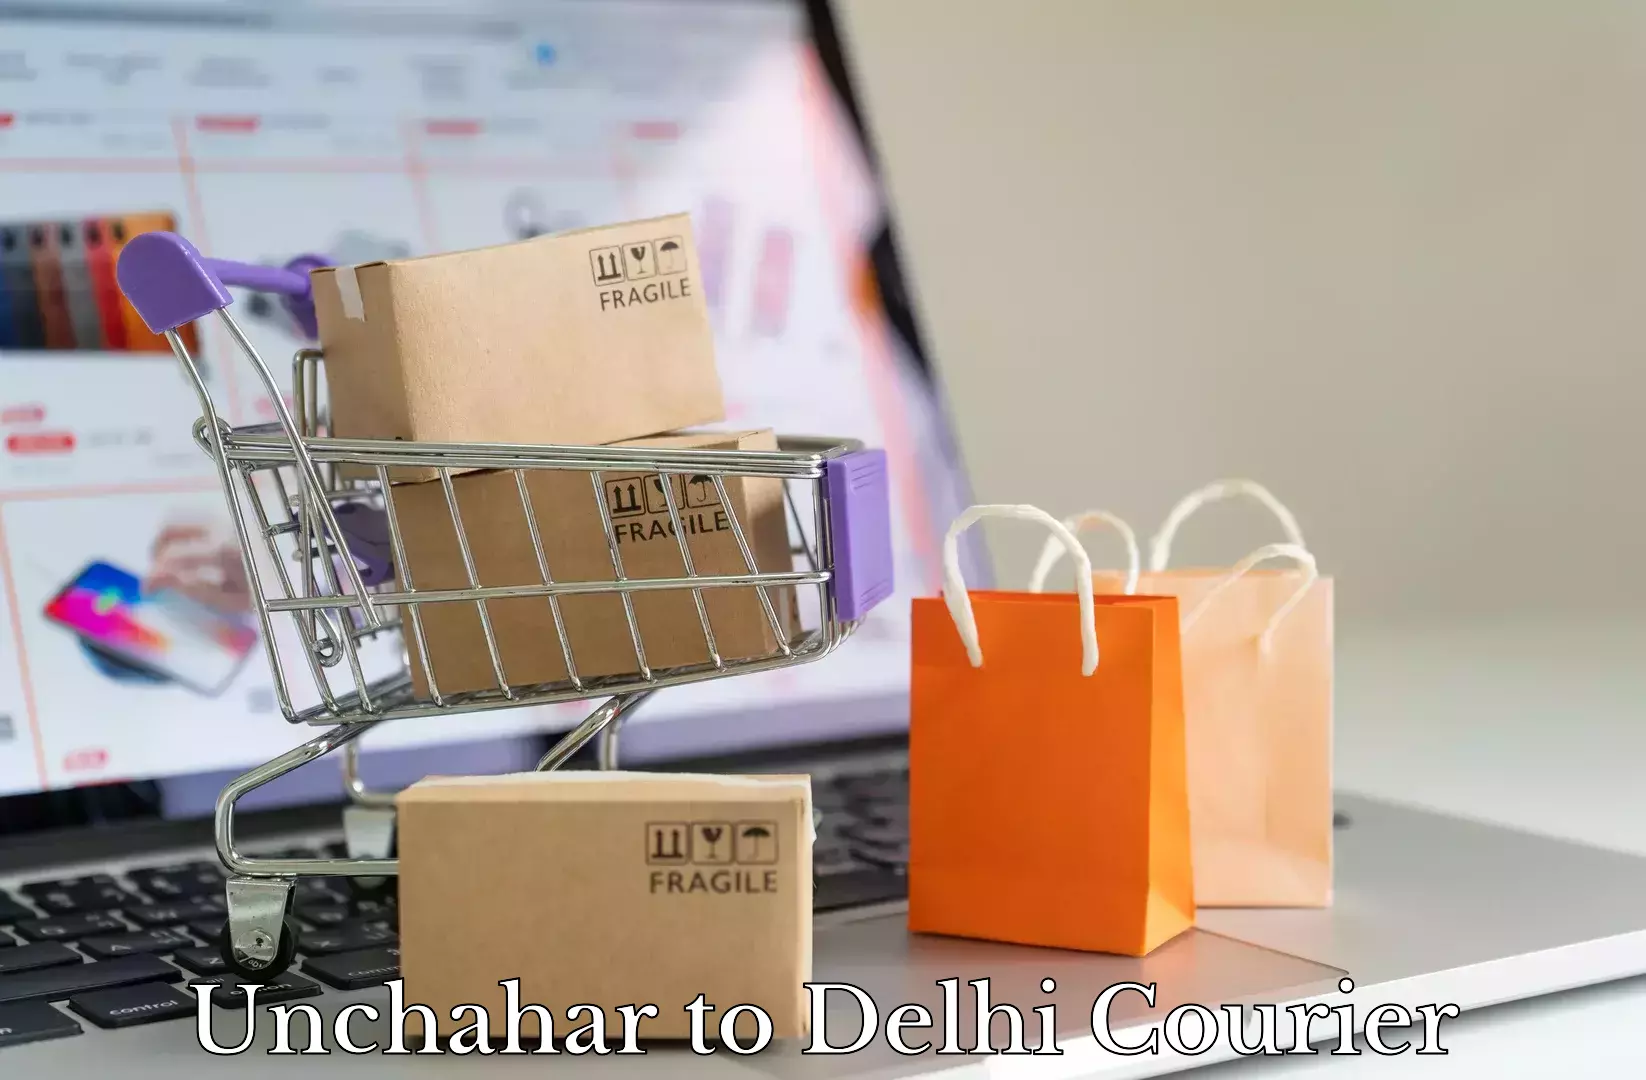 Efficient moving company Unchahar to Lodhi Road